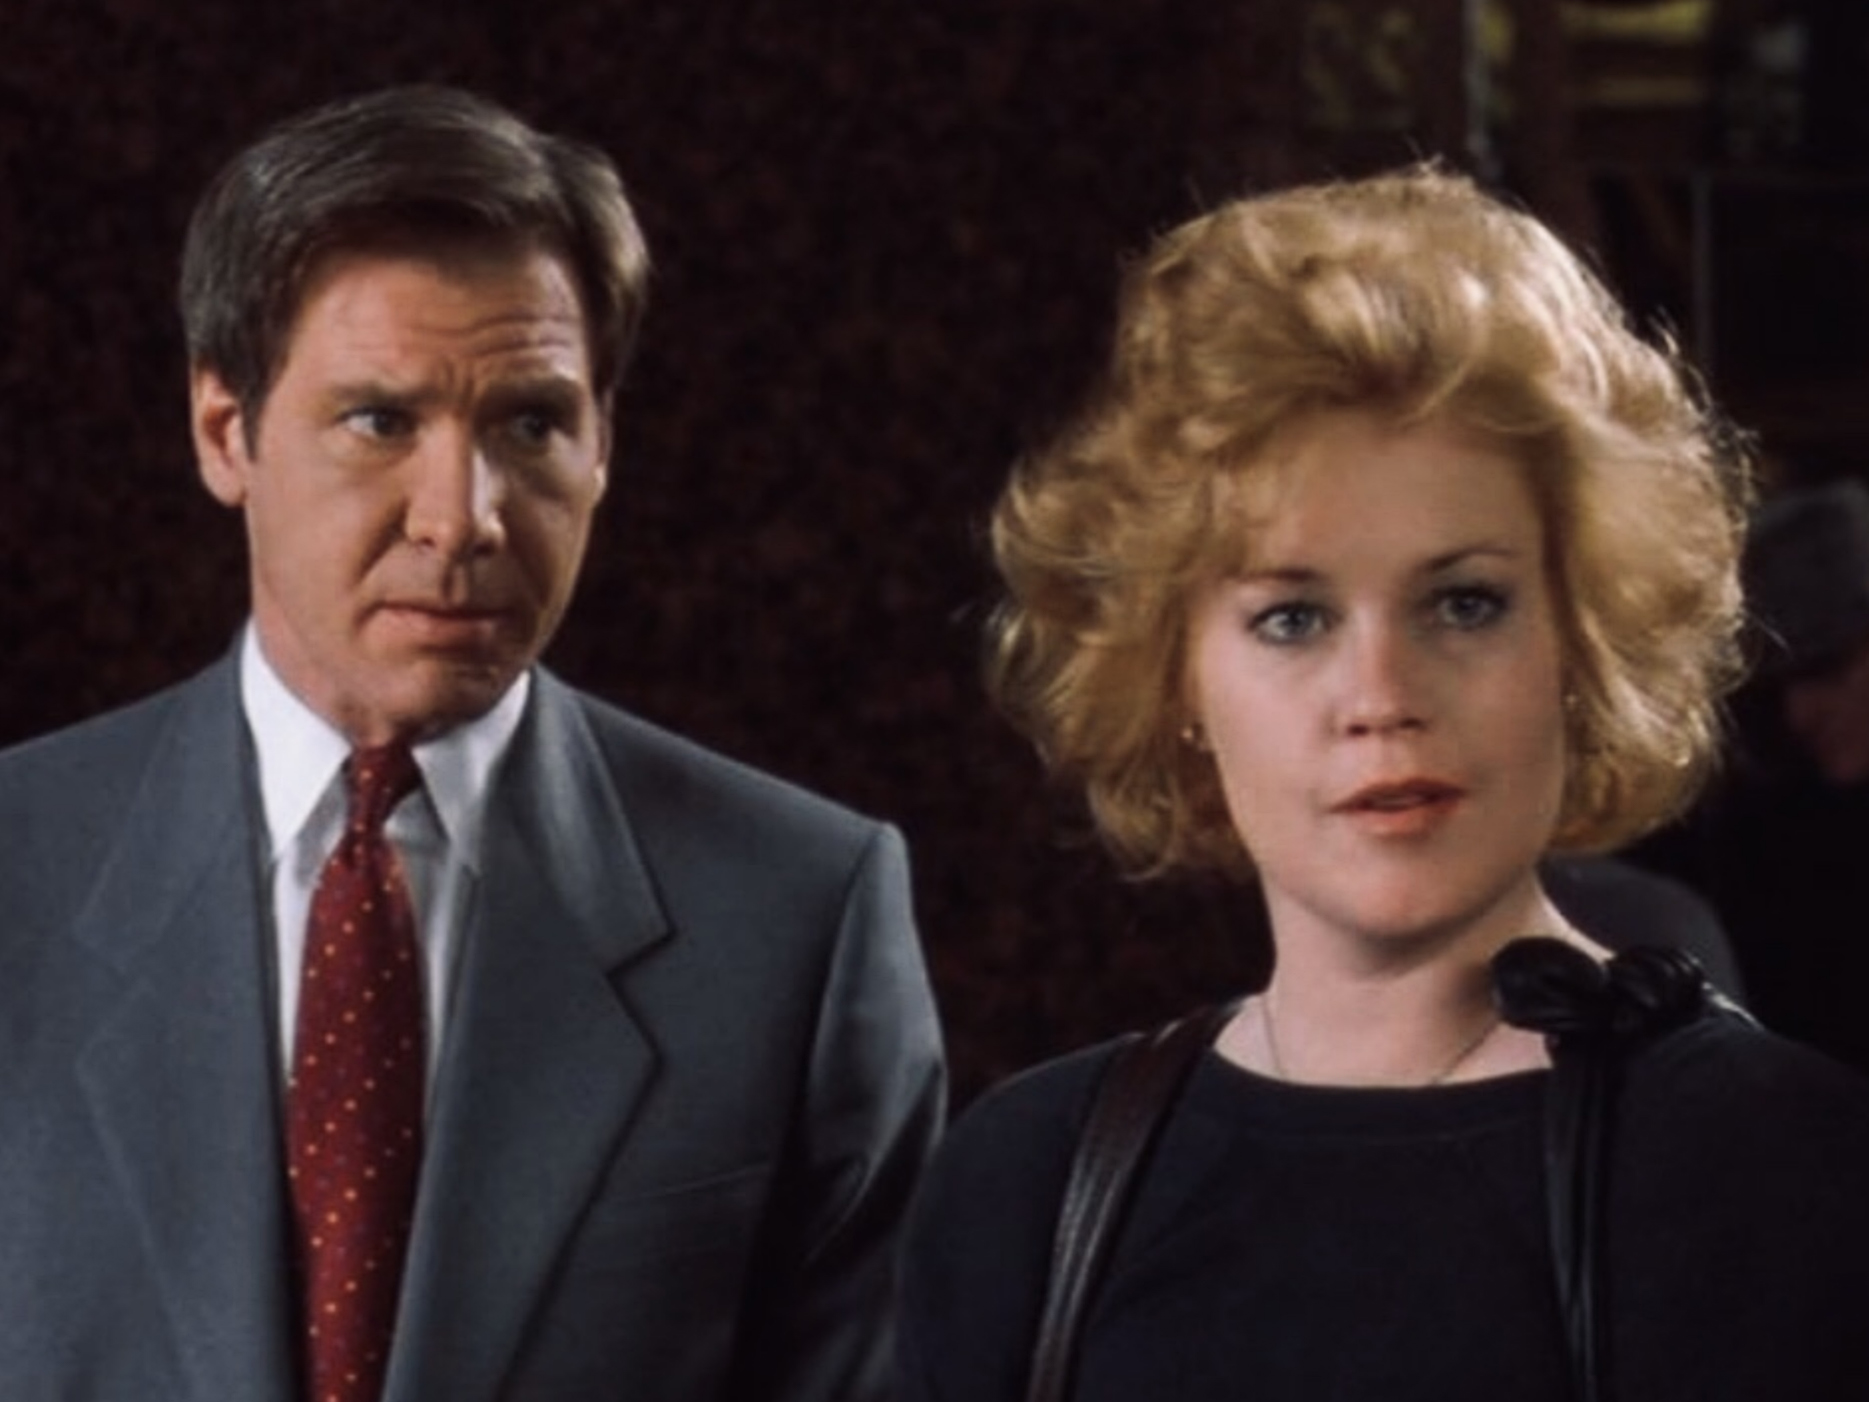 Harrison Ford and Melanie Griffith in “Working Girl” (1988)